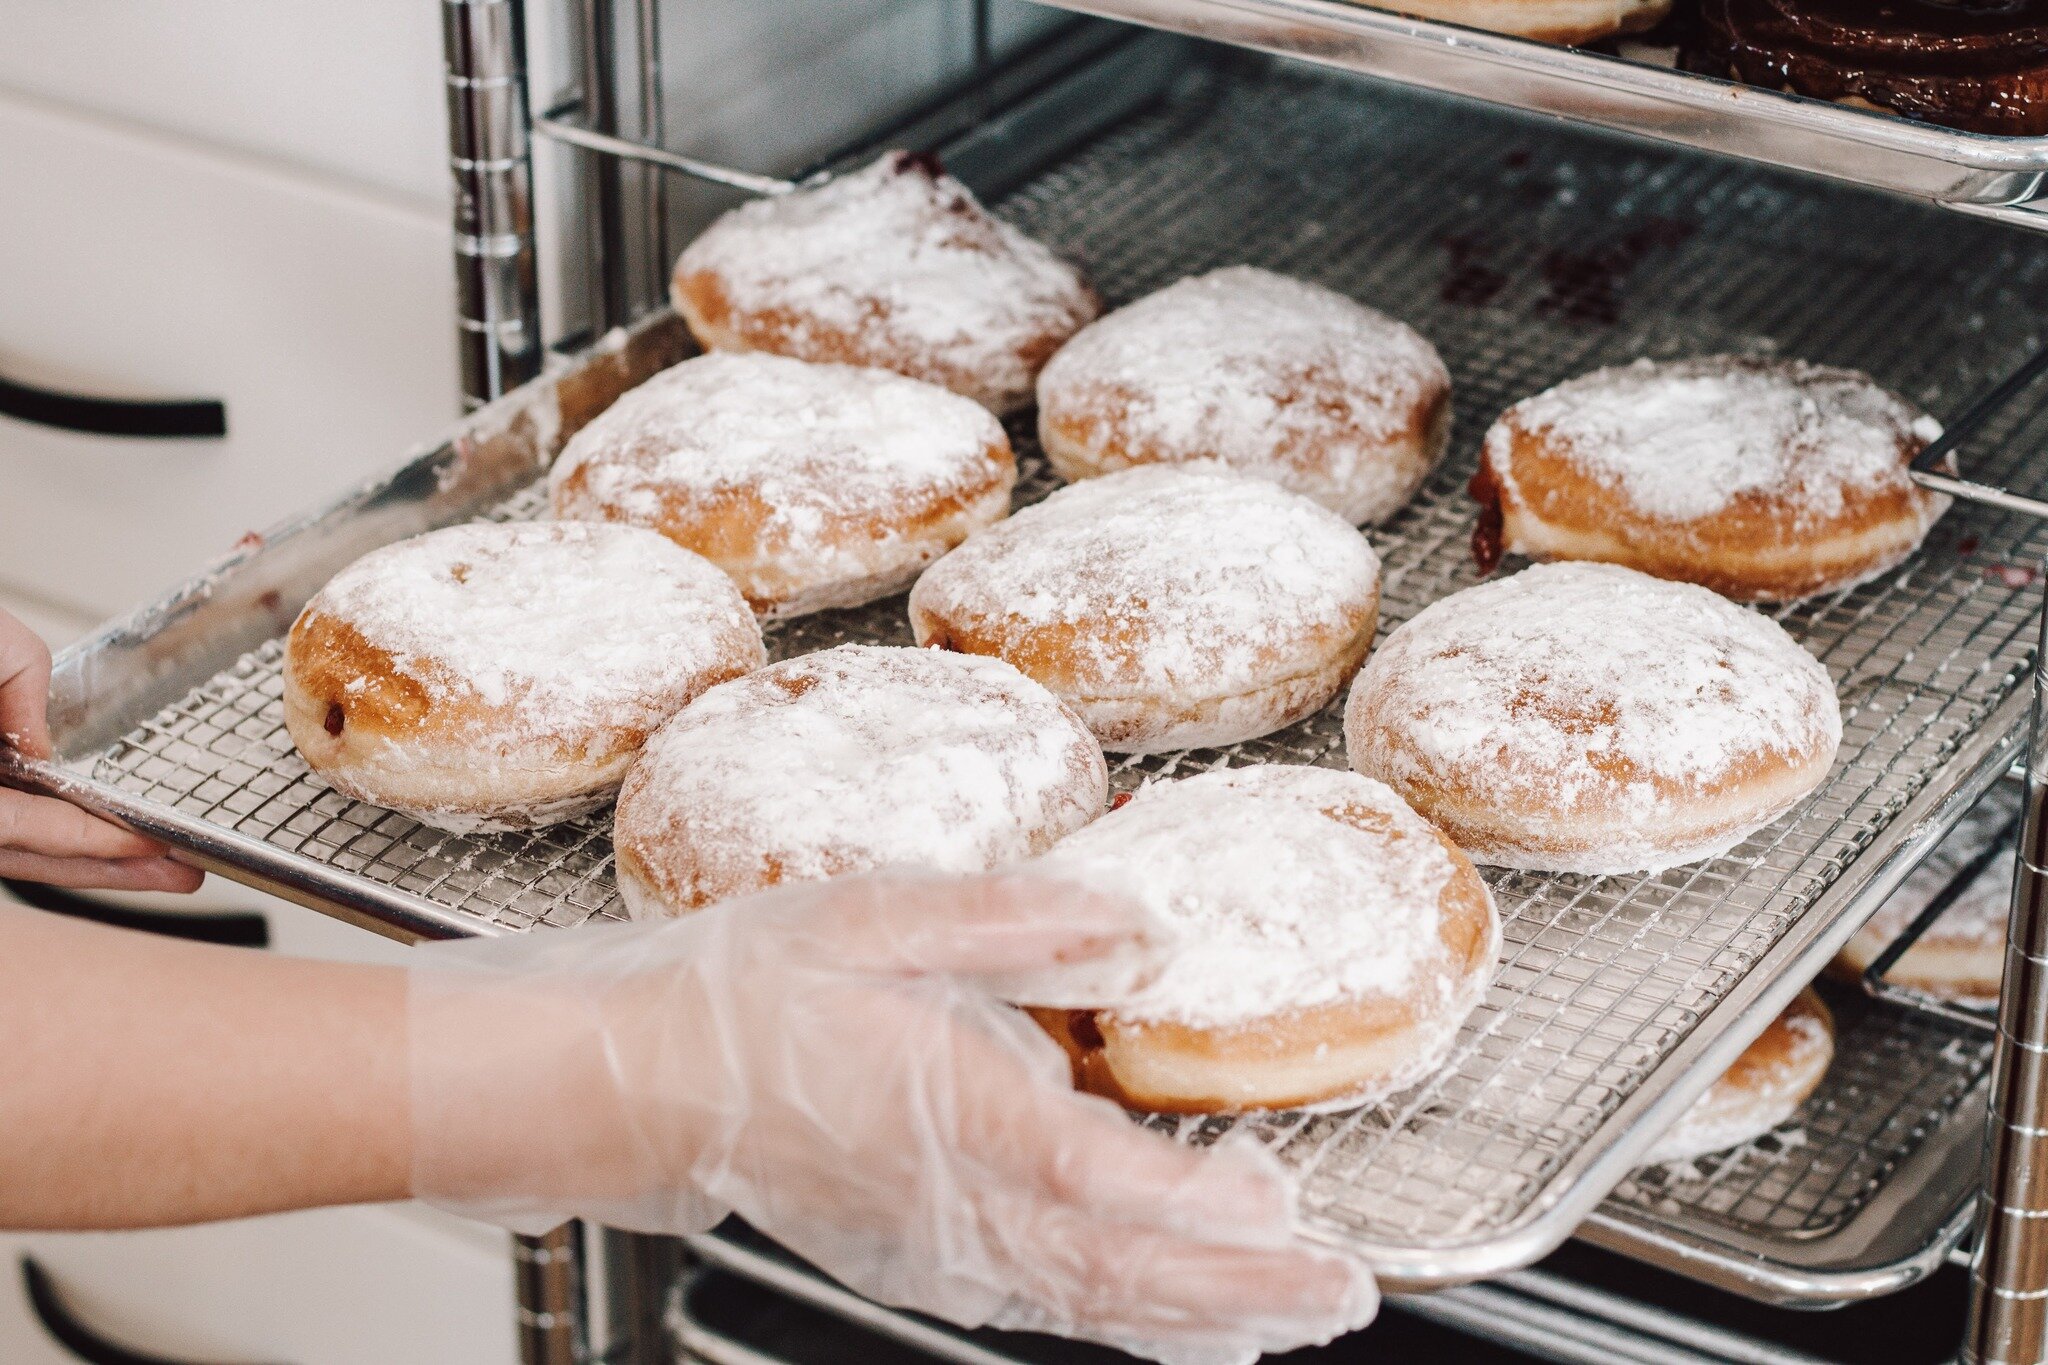 .
🍩 feature: the raspberry-filled

It's a doughnut filled with our housemade raspberry filling, similar to a pie filling, and coated with powdered sugar 🤤 These will be available for the month of May, so don't wait too long to come try them!

3252 